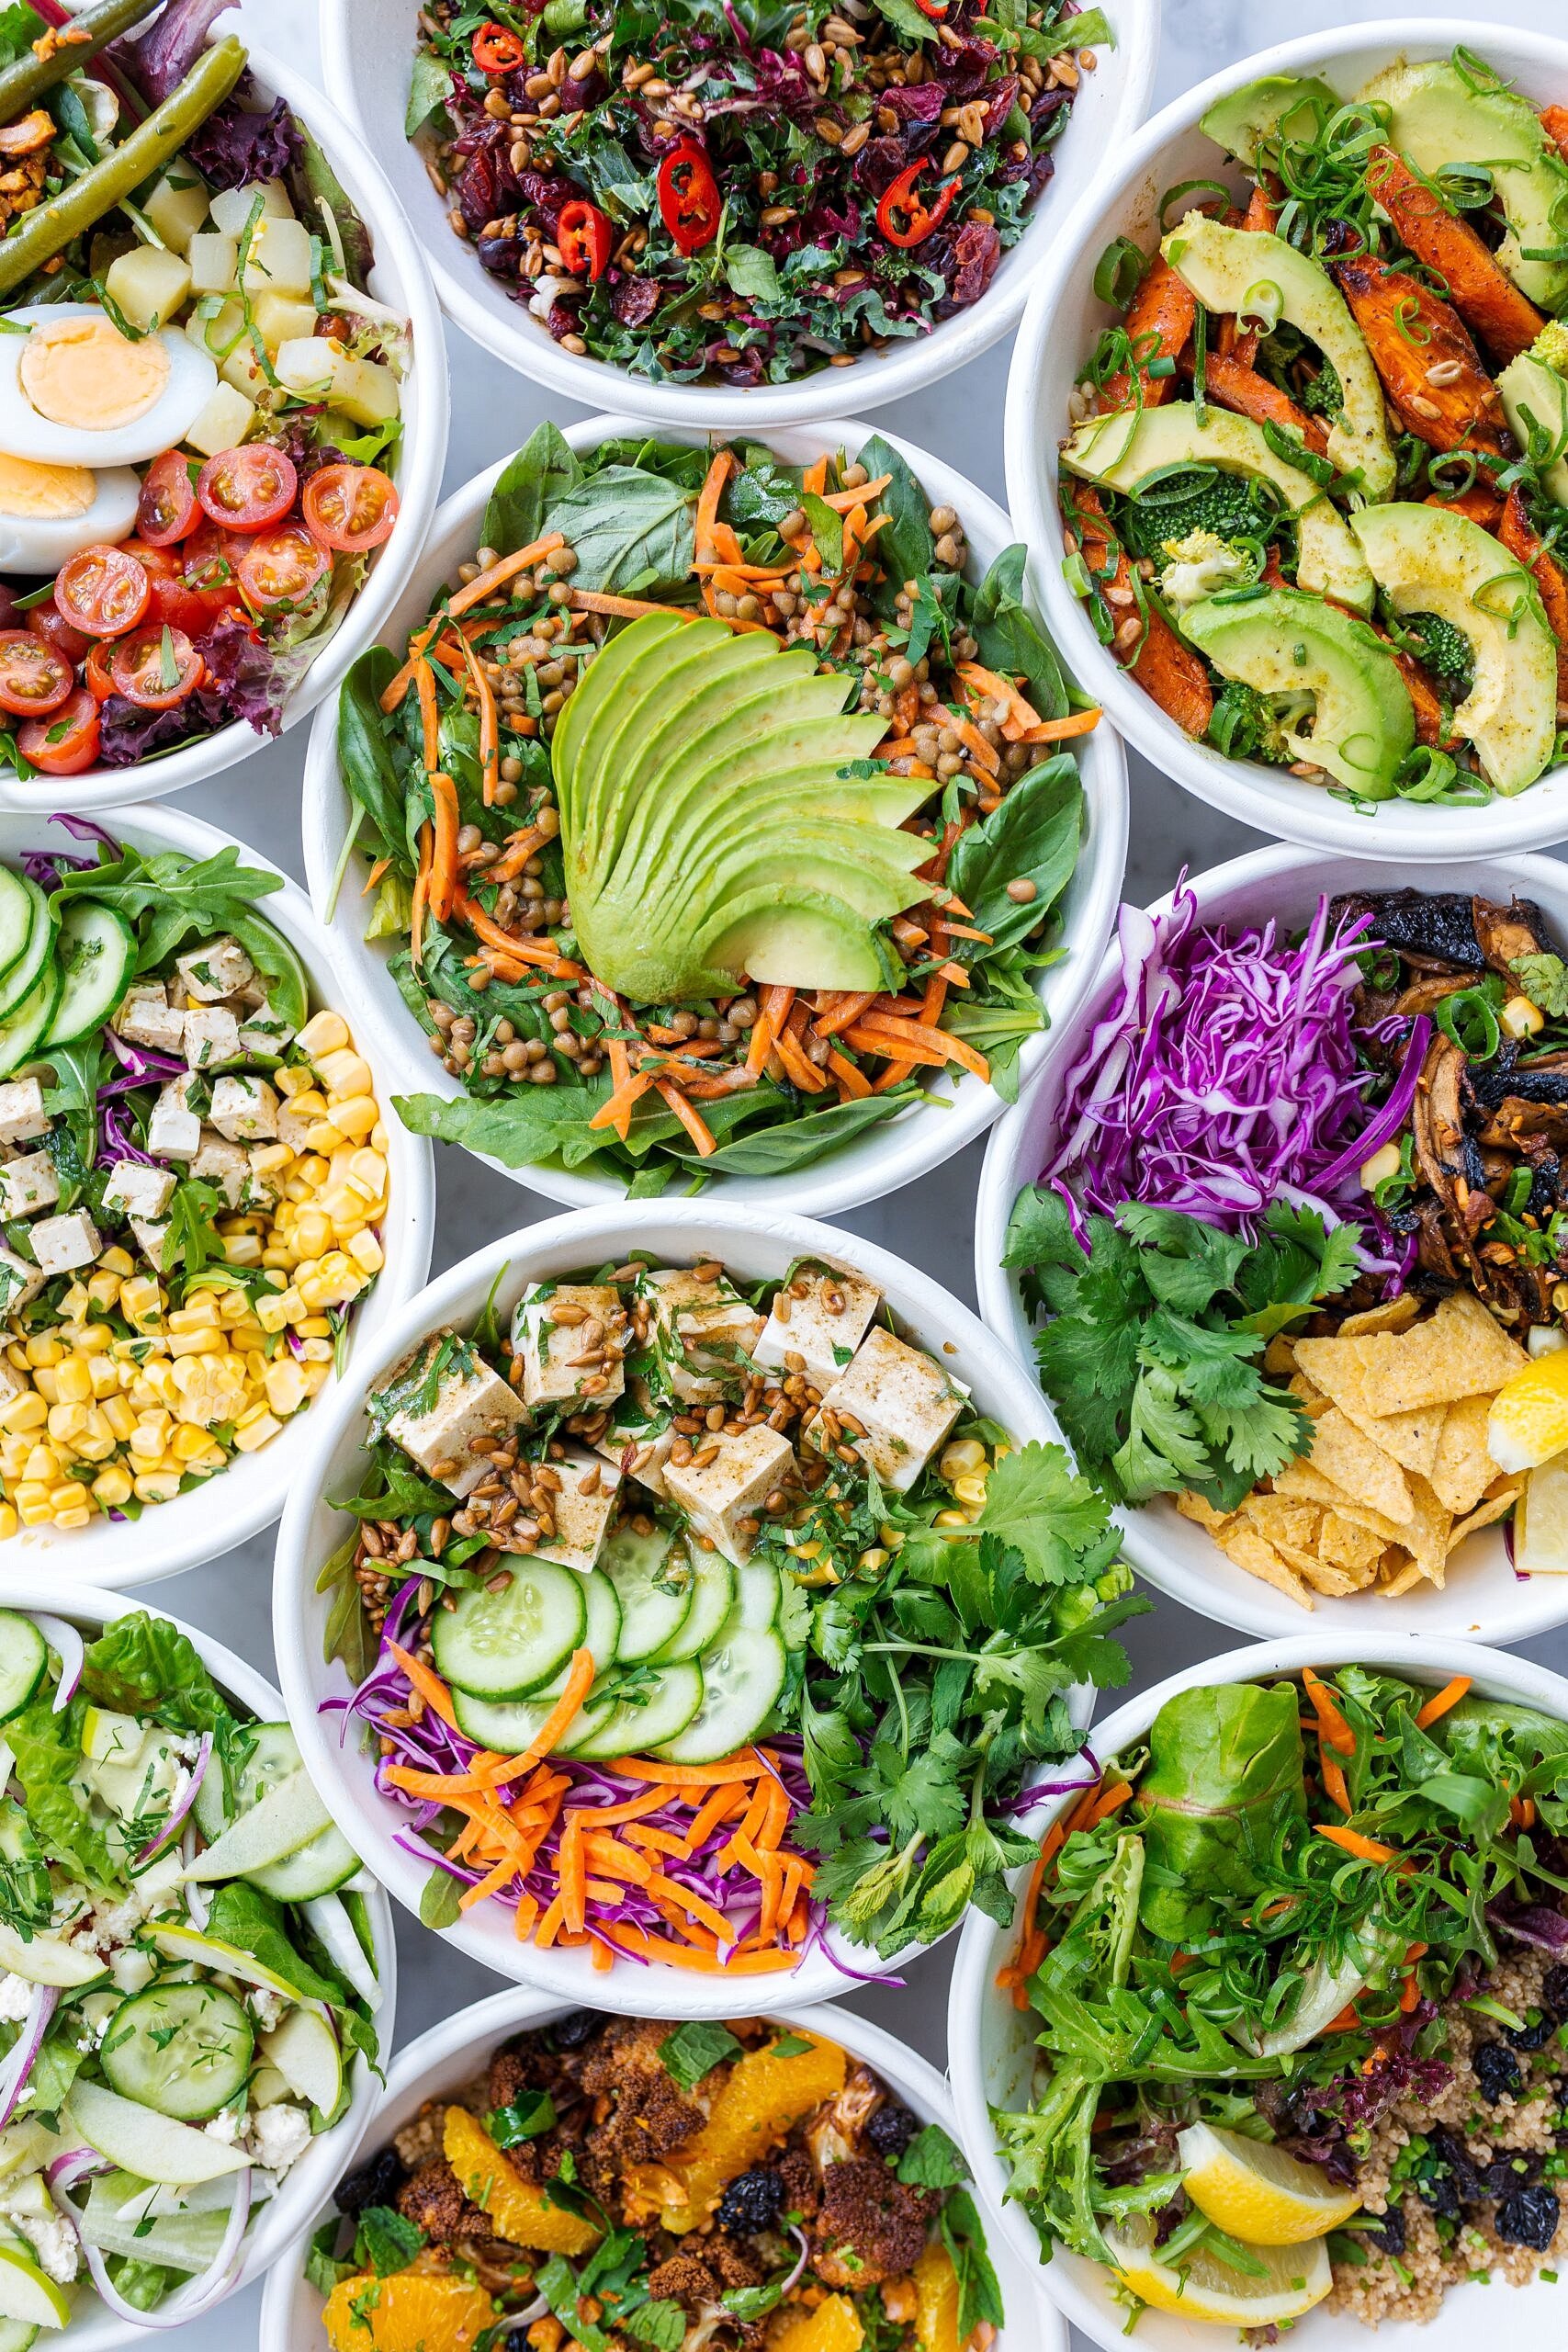 Birds eye view image of multiple salads in white bowls.